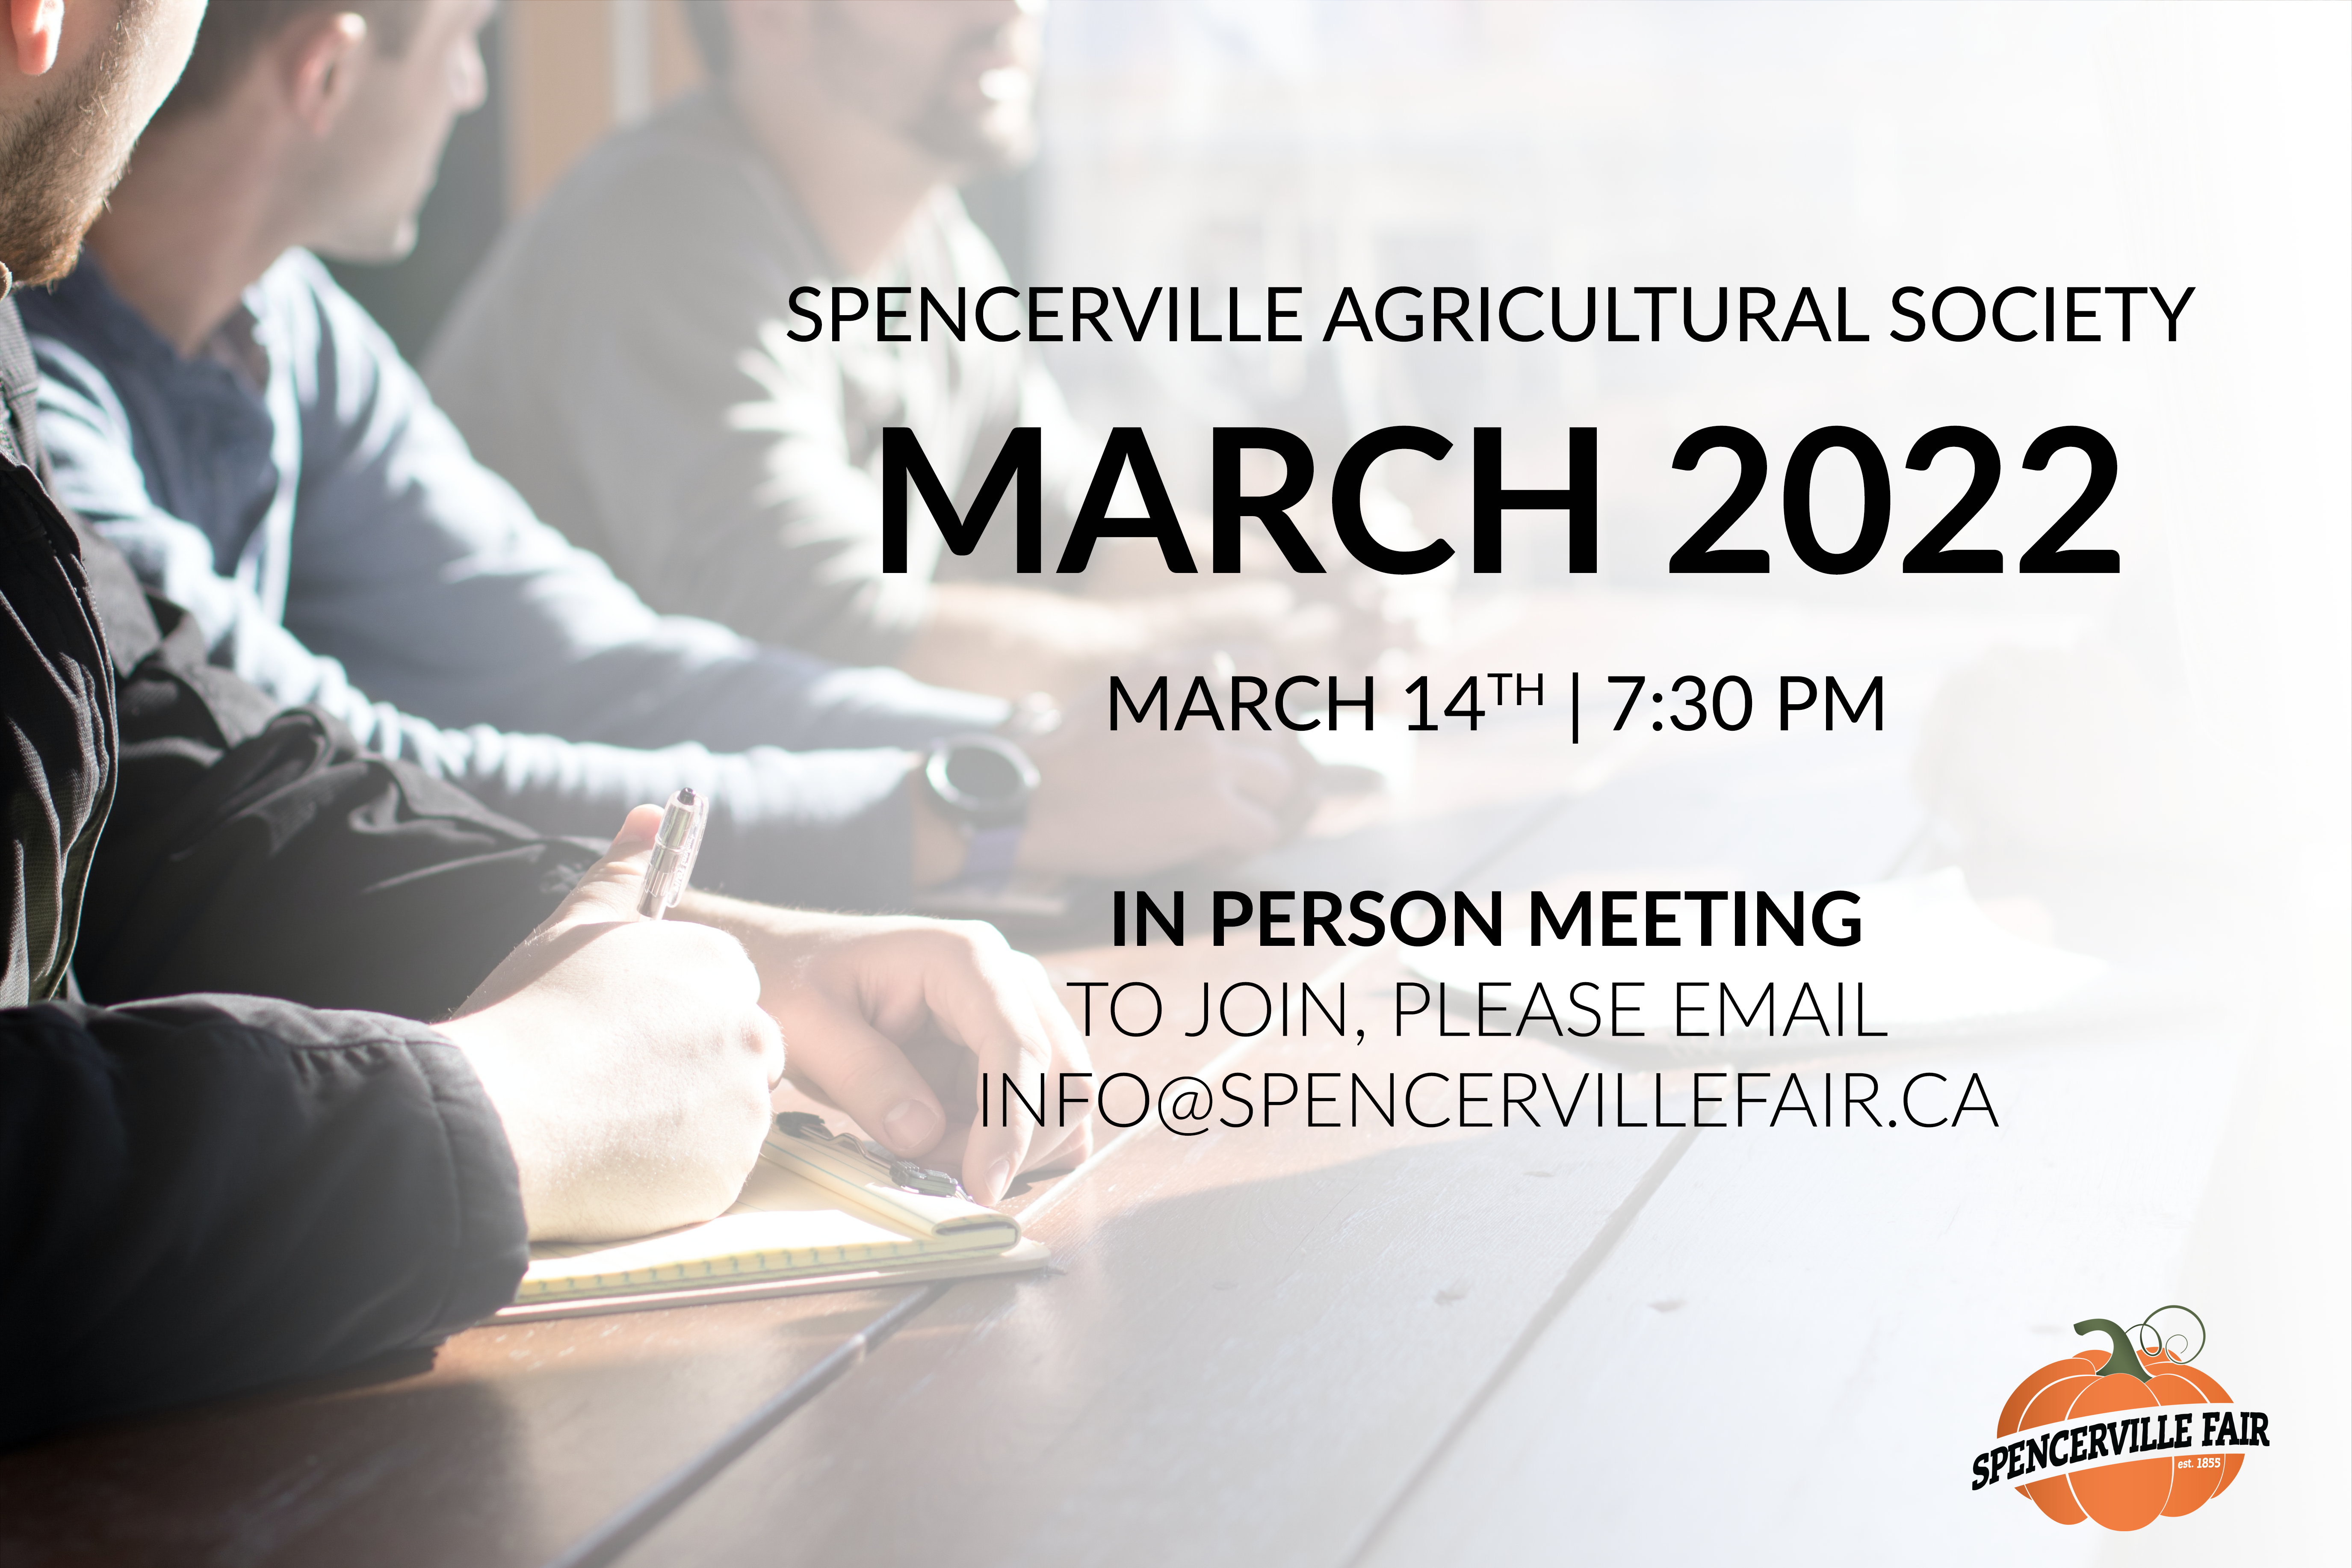 Spencerville Agricultural Society March 2022 meeting March 14, 7:30 pm.